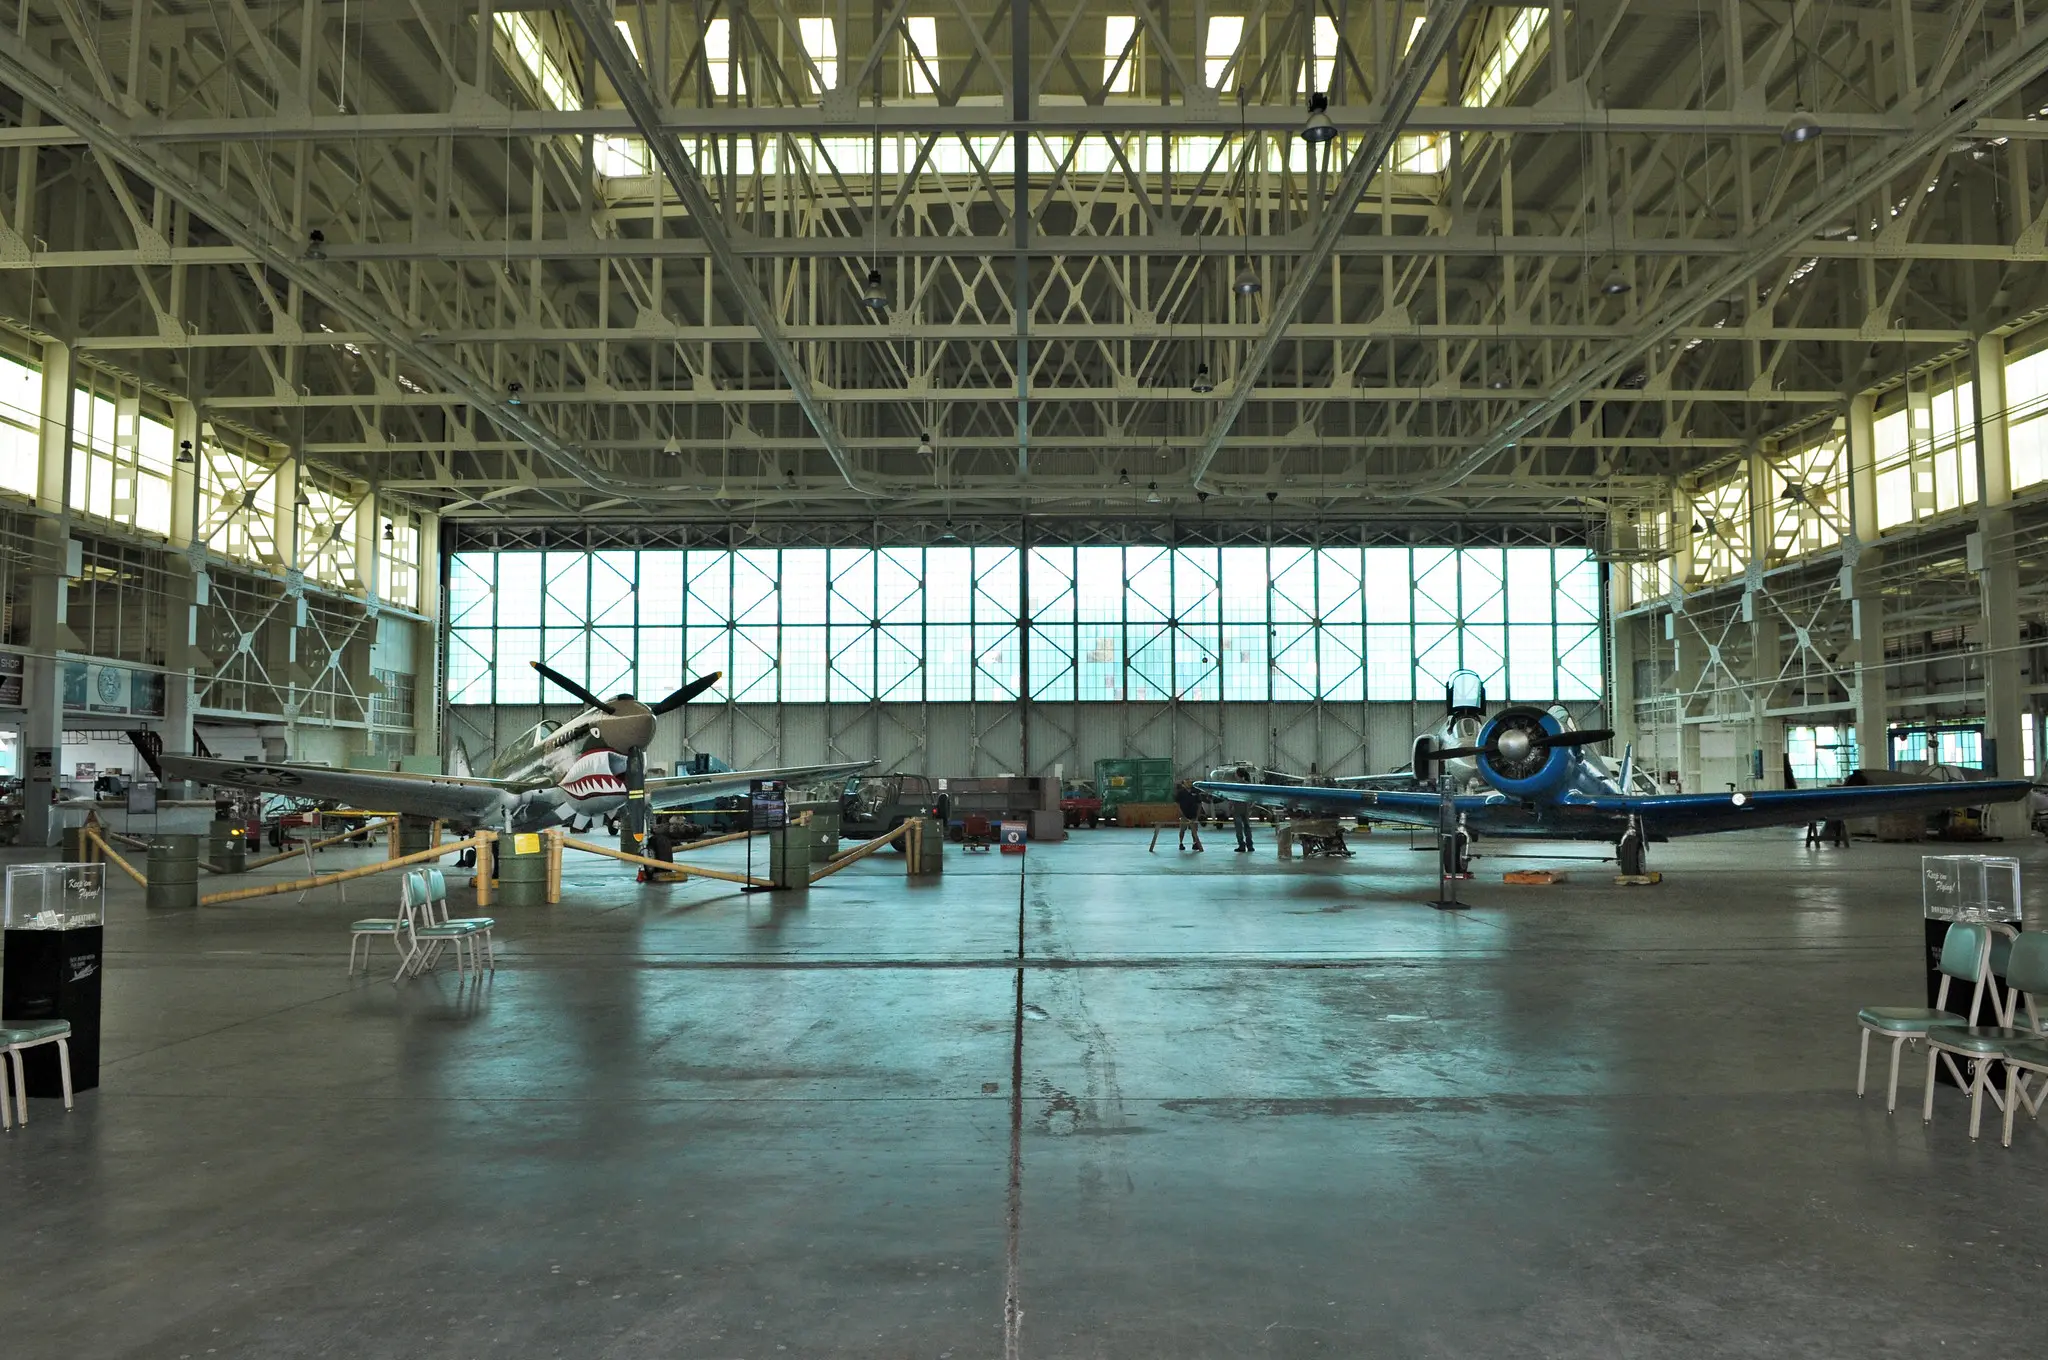 E E K - Adult Sketching in the Hangar